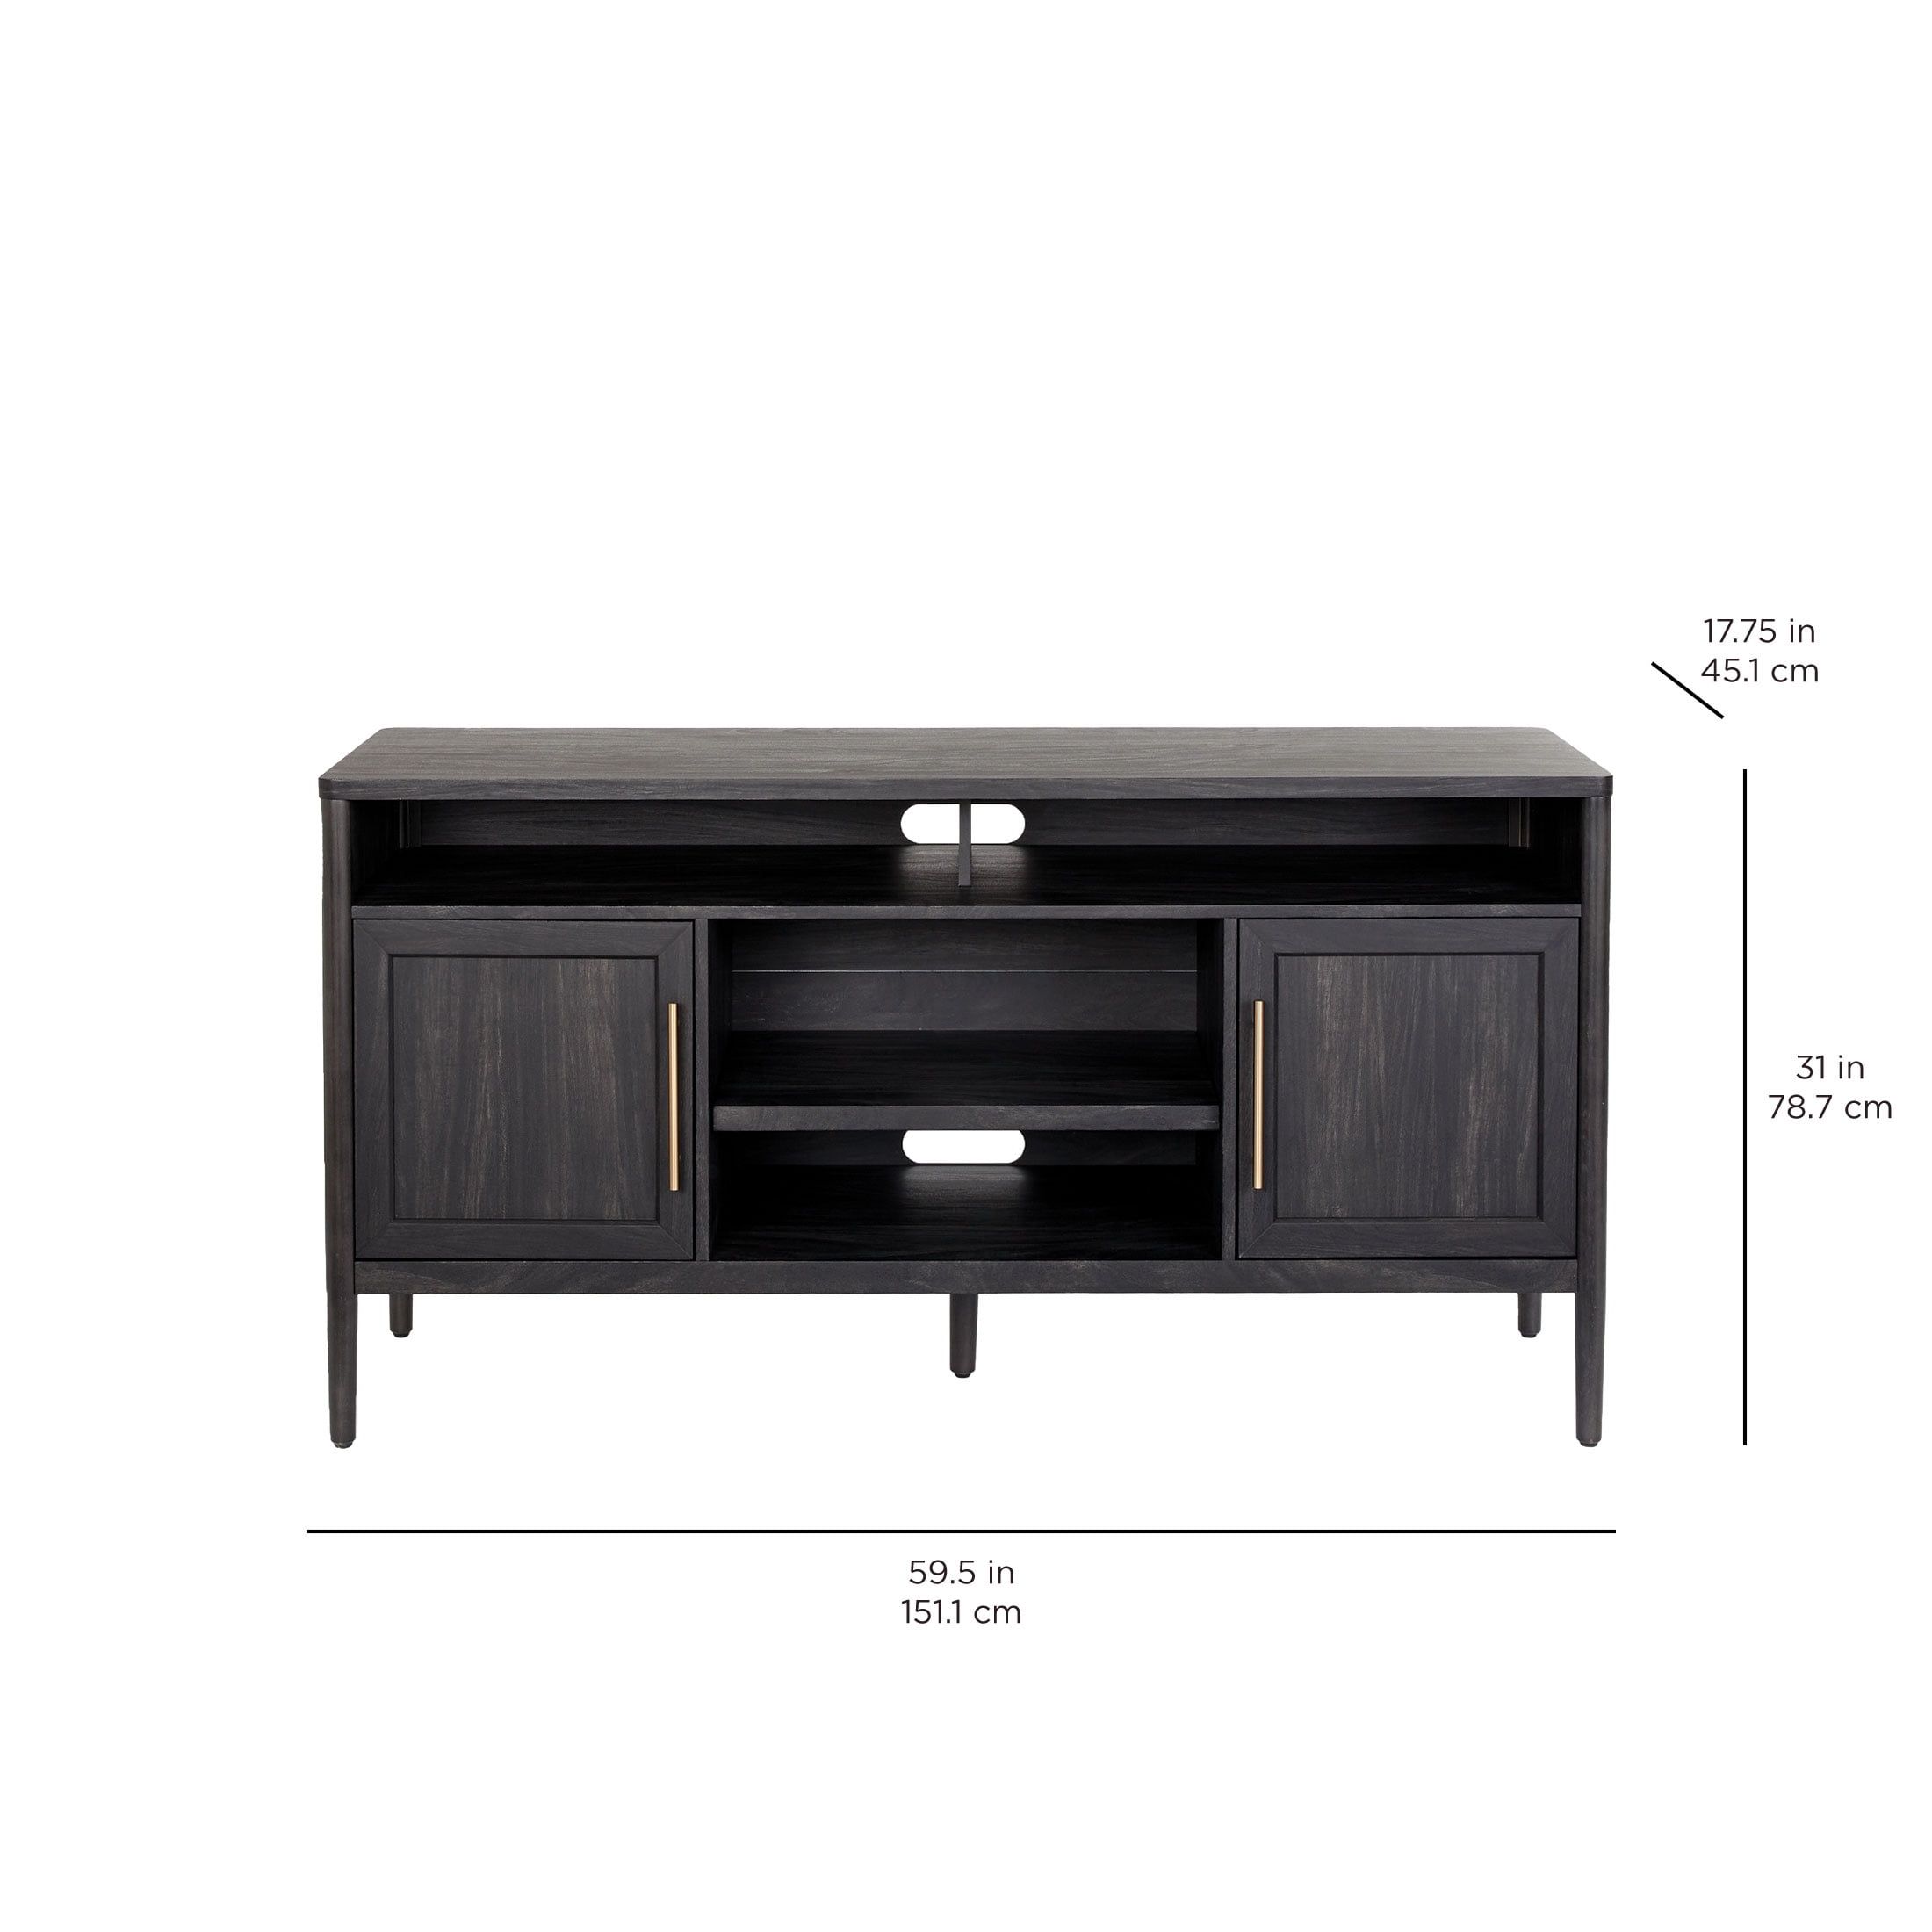 Better Homes & Gardens Oaklee Tv Stand For Tvs Up To 70”, Charcoal Finish –  Walmart Throughout Oaklee Tv Stands (View 2 of 15)